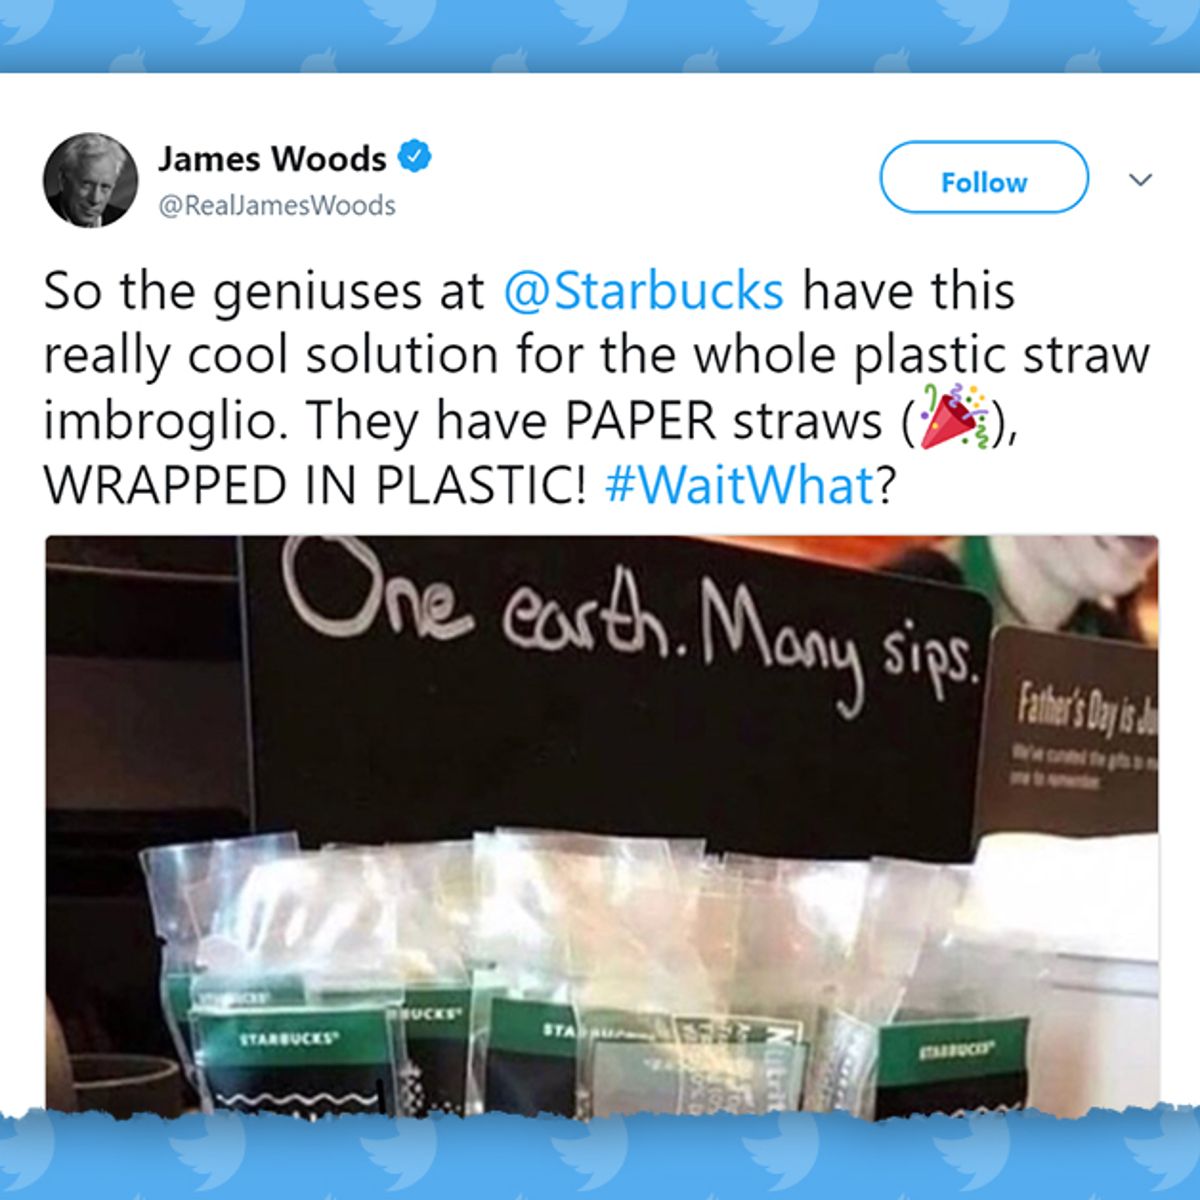 Starbucks Straw Ban: Sippy Cups Will Replace Plastic Straws by 2020 - Eater